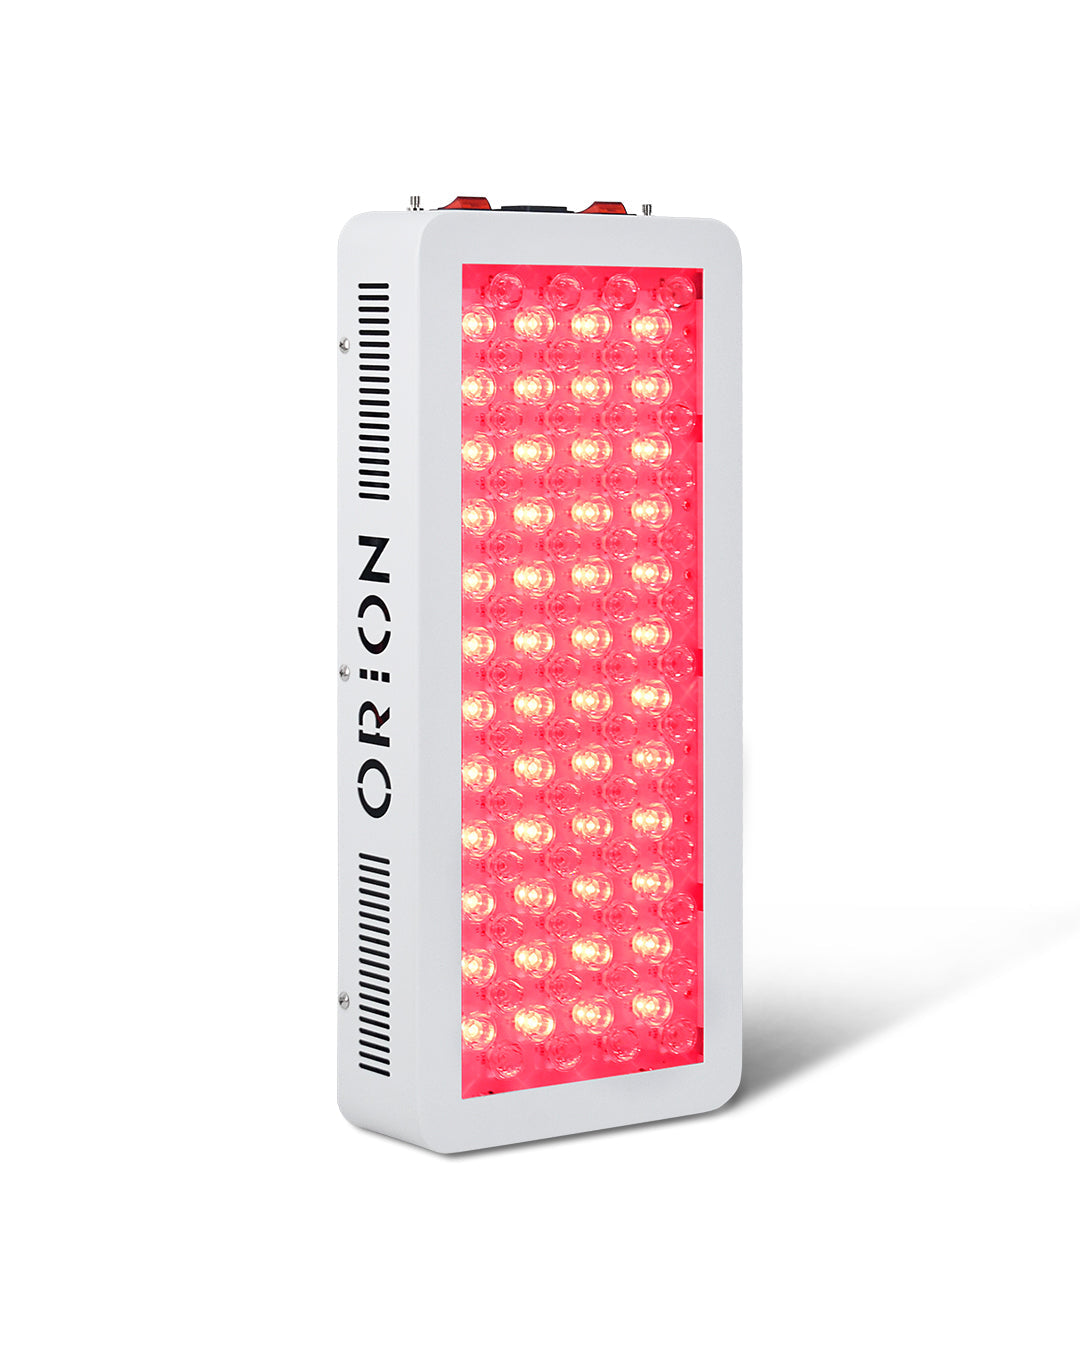 Orion 500 turned on. Orion Red Light Therapy. LED Light Therapy. Improves Collagen Production. Mitochondria. Muscle Recovery and Performance.